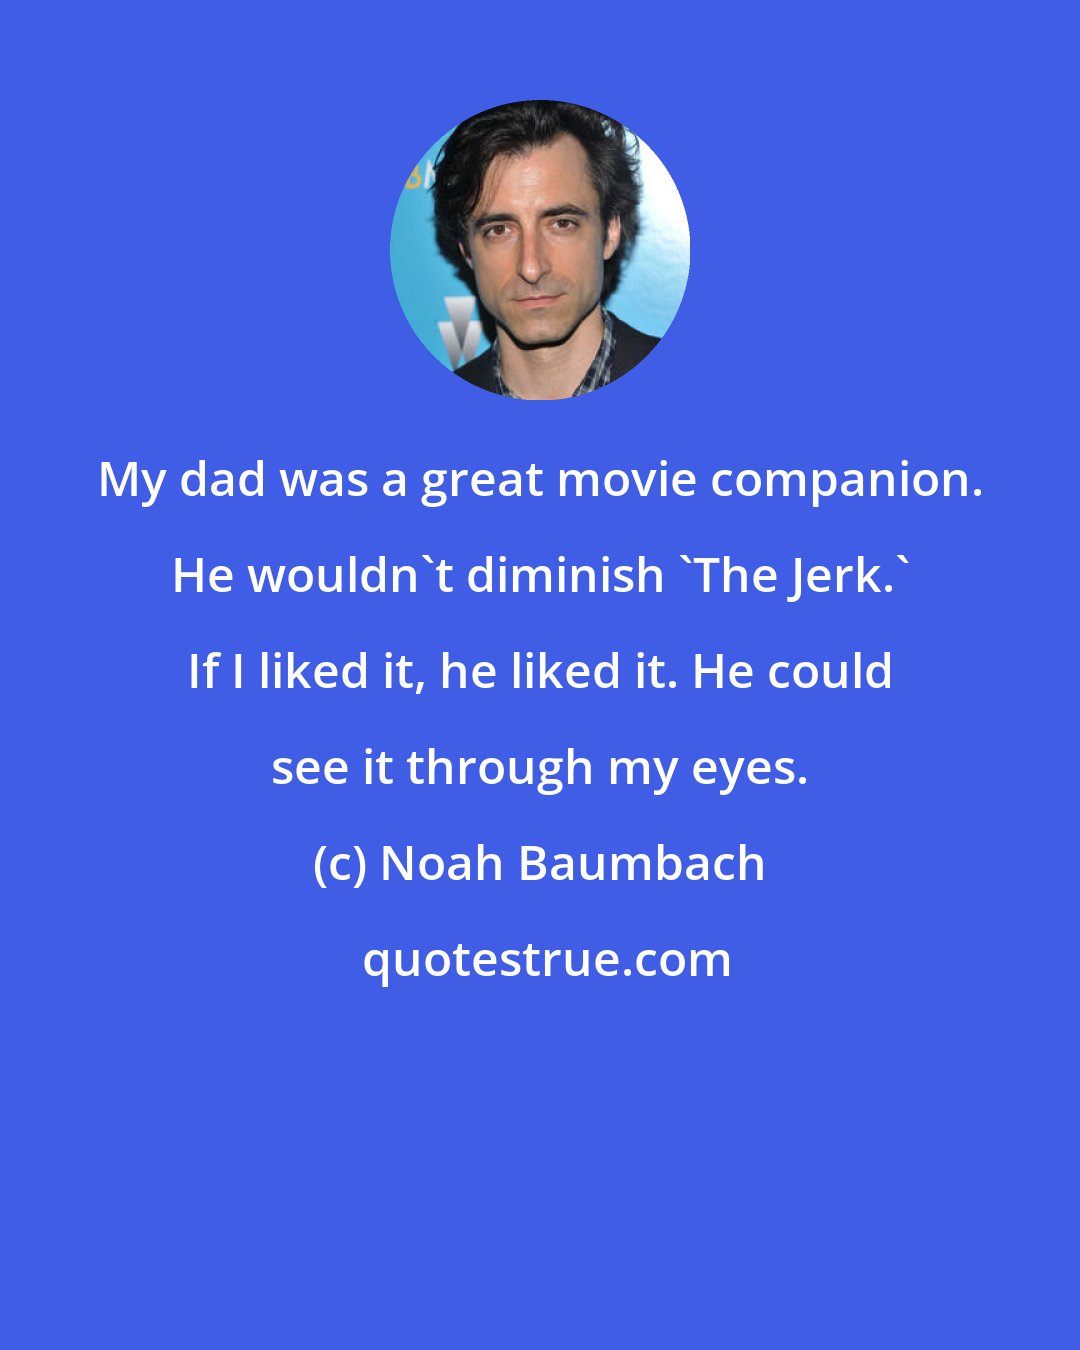 Noah Baumbach: My dad was a great movie companion. He wouldn't diminish 'The Jerk.' If I liked it, he liked it. He could see it through my eyes.